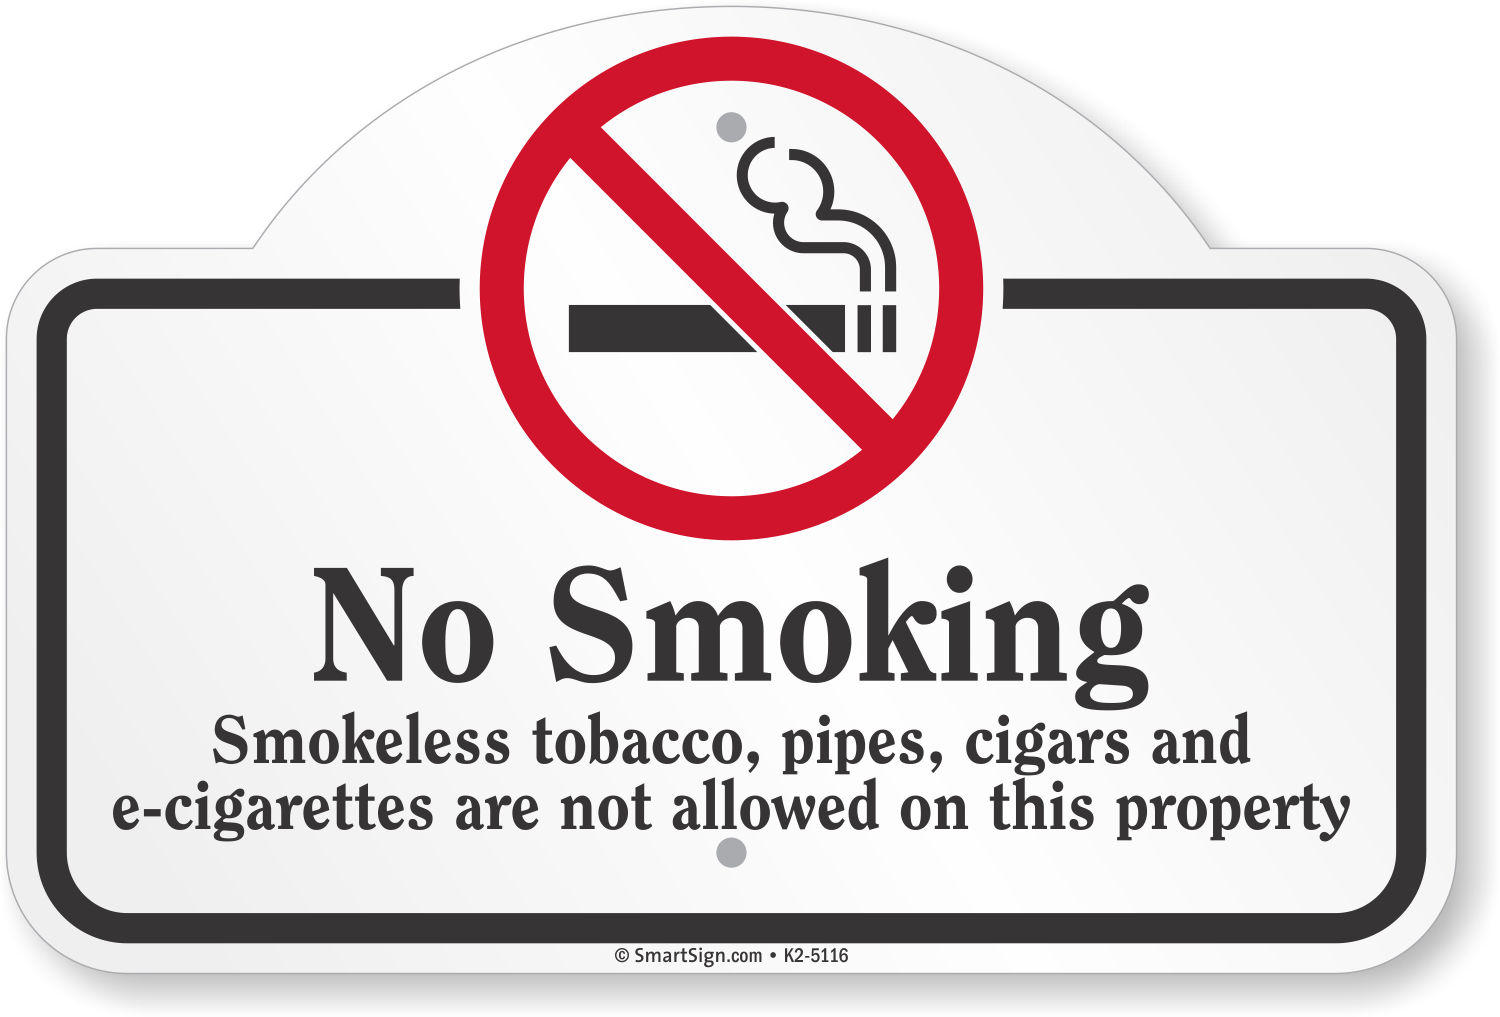 Знак no smoking. Smoking not allowed. No smoking знак pdf. Знак курение запрещено вектор. Additional property is not allowed